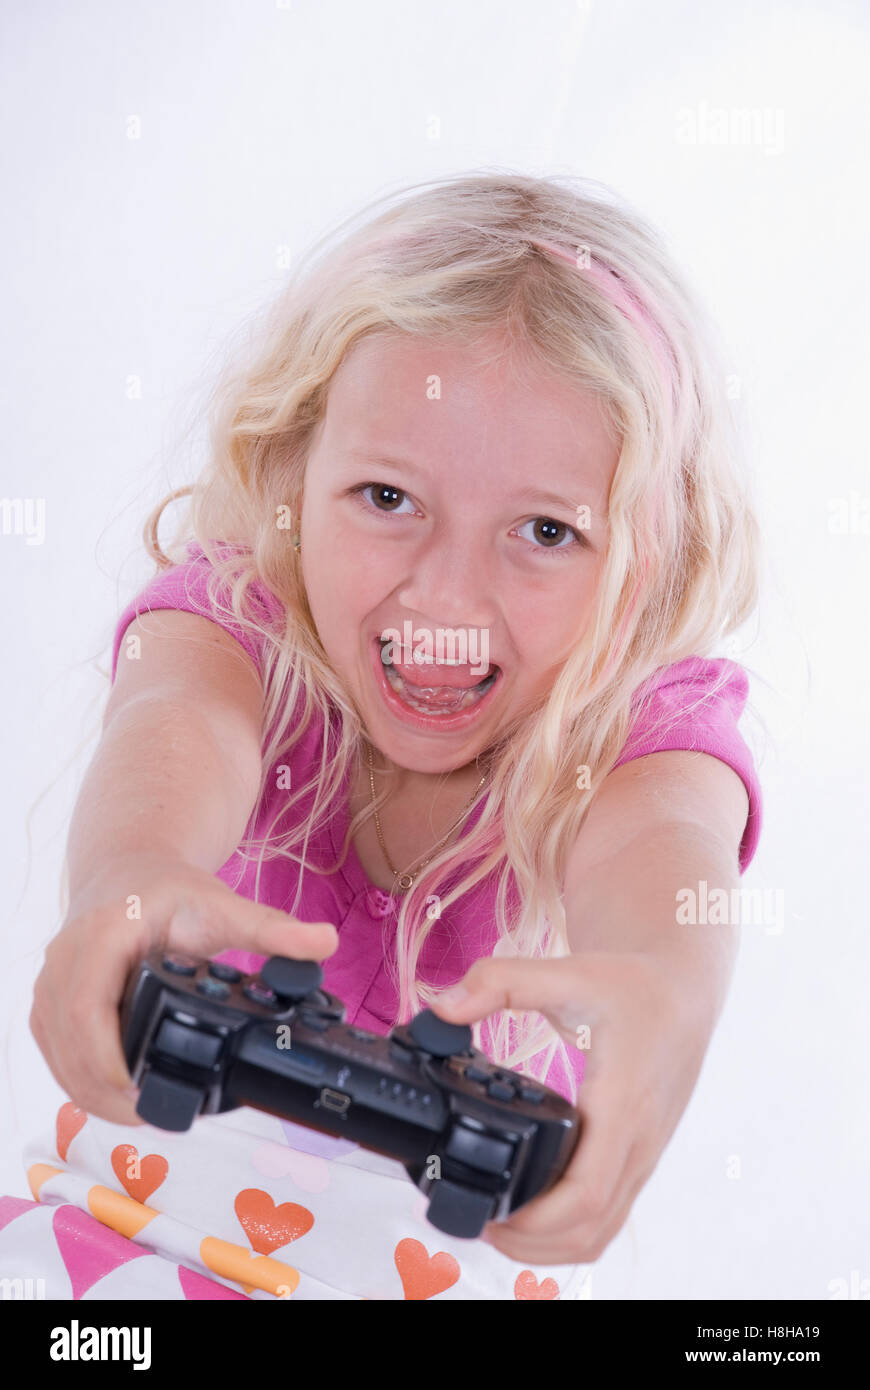 Girl, 7 years old, playing on Playstation Stock Photo